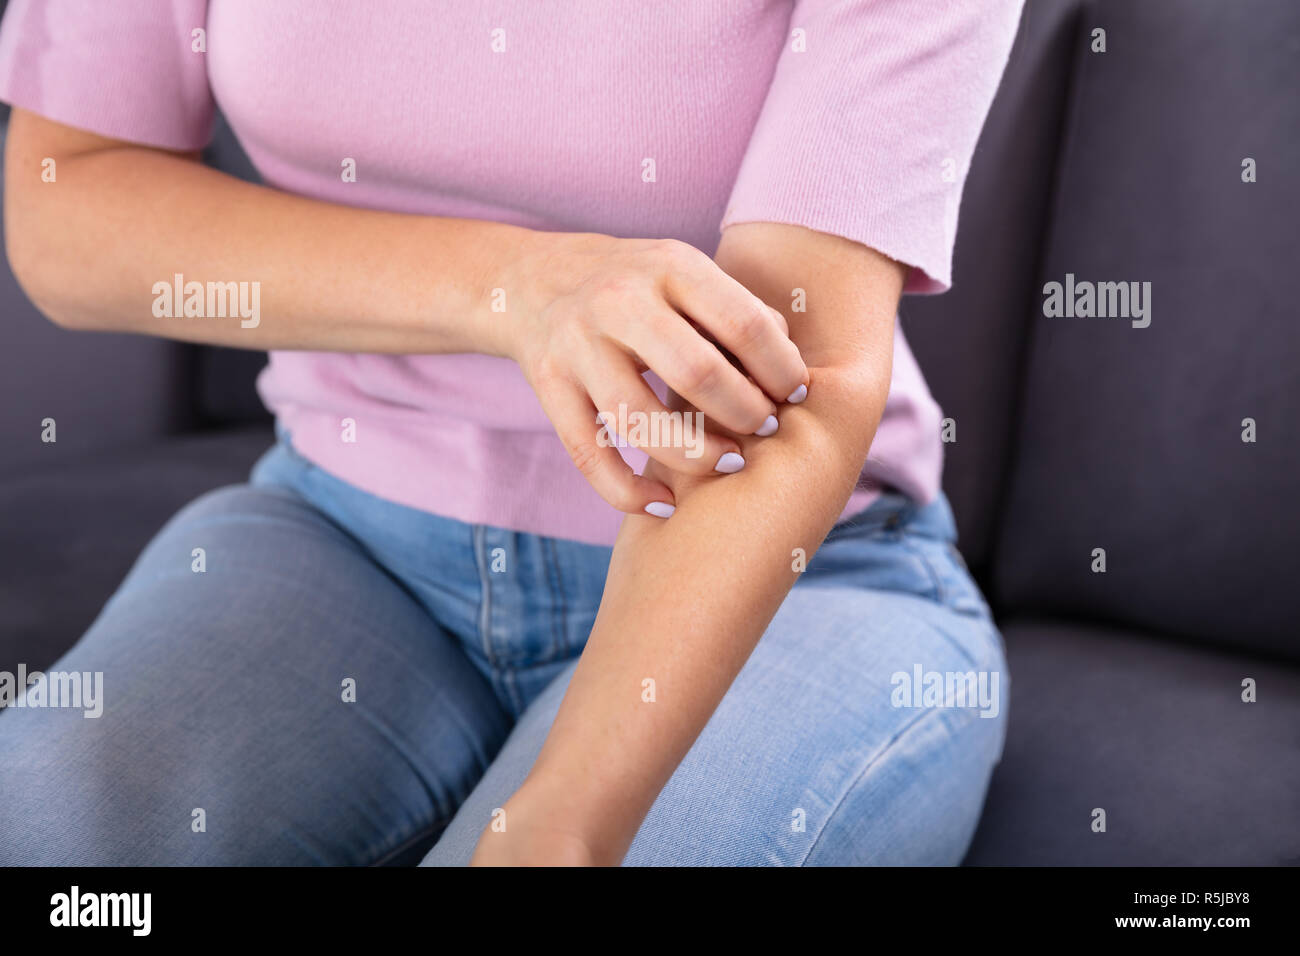 Close-up Of A Woman's Hand Scratching The Itch On Her Arm Stock Photo